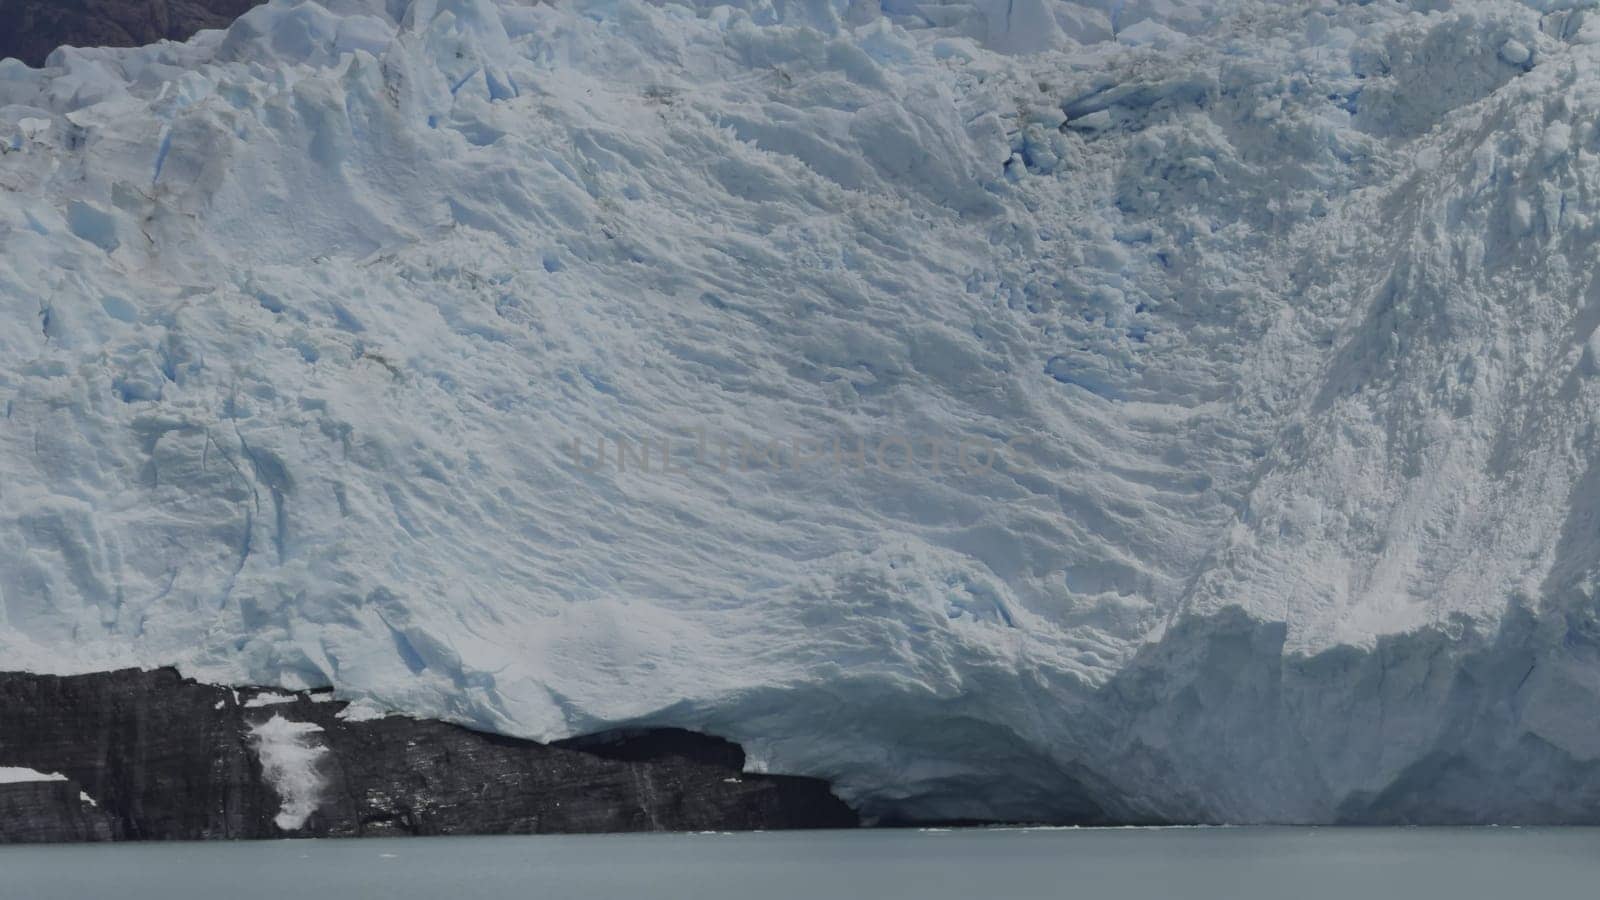 Captured slow-mo footage of a glacier calving, with chunks of ice plunging into the sea and creating splashes.